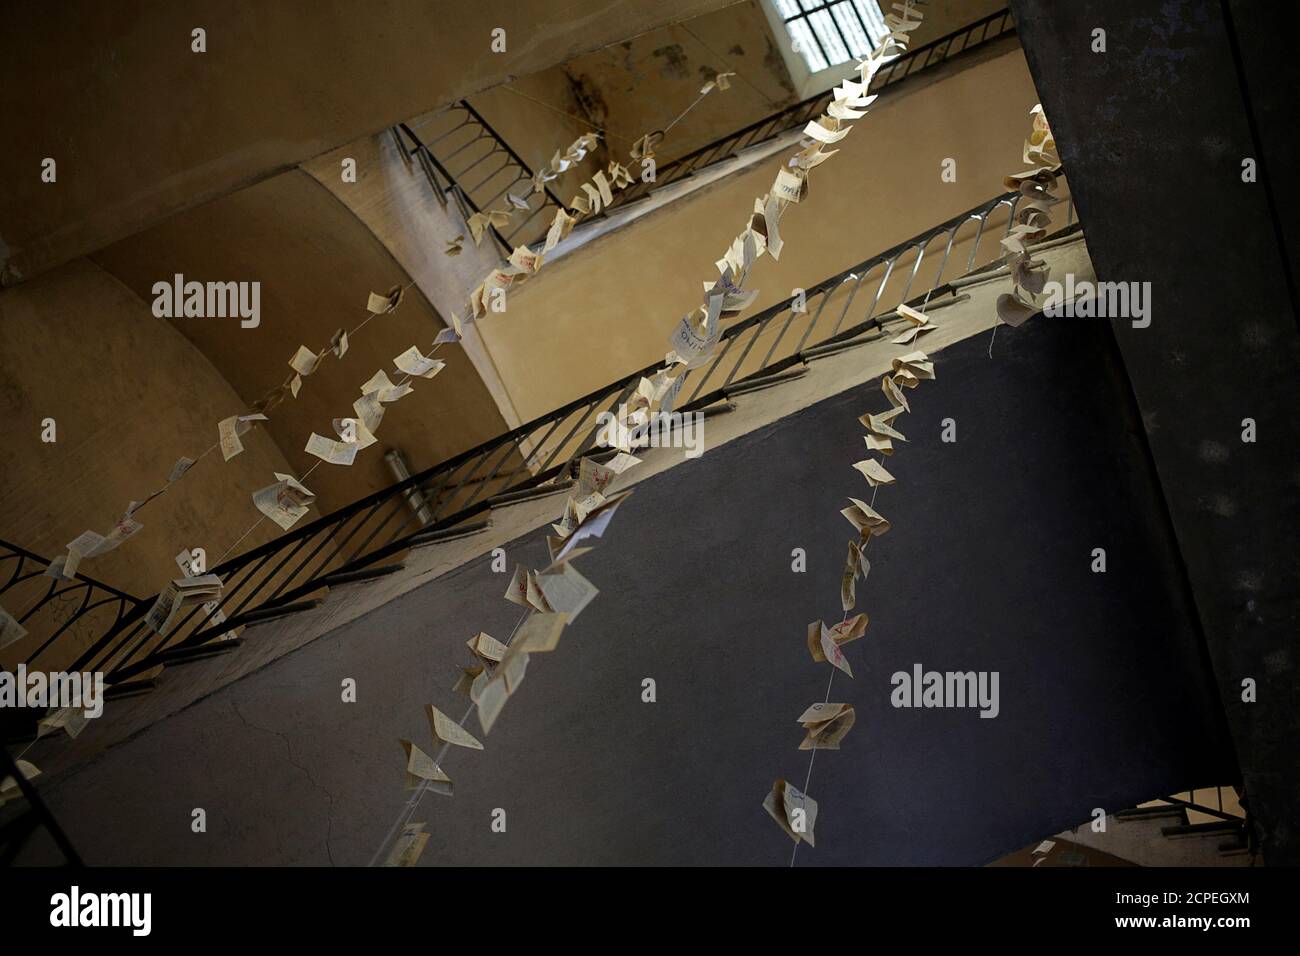 A view shows pages from books hanging at the main stairway of the Cavallerizza Reale building, which is occupied by the 'Assemblea Cavallerizza 14:45' movement in Turin, Italy, July 15, 2016. REUTERS/Marco Bello       SEARCH 'CAVALLERIZZA REALE' FOR THIS STORY. SEARCH 'WIDER IMAGE' FOR ALL STORIES. Stock Photo